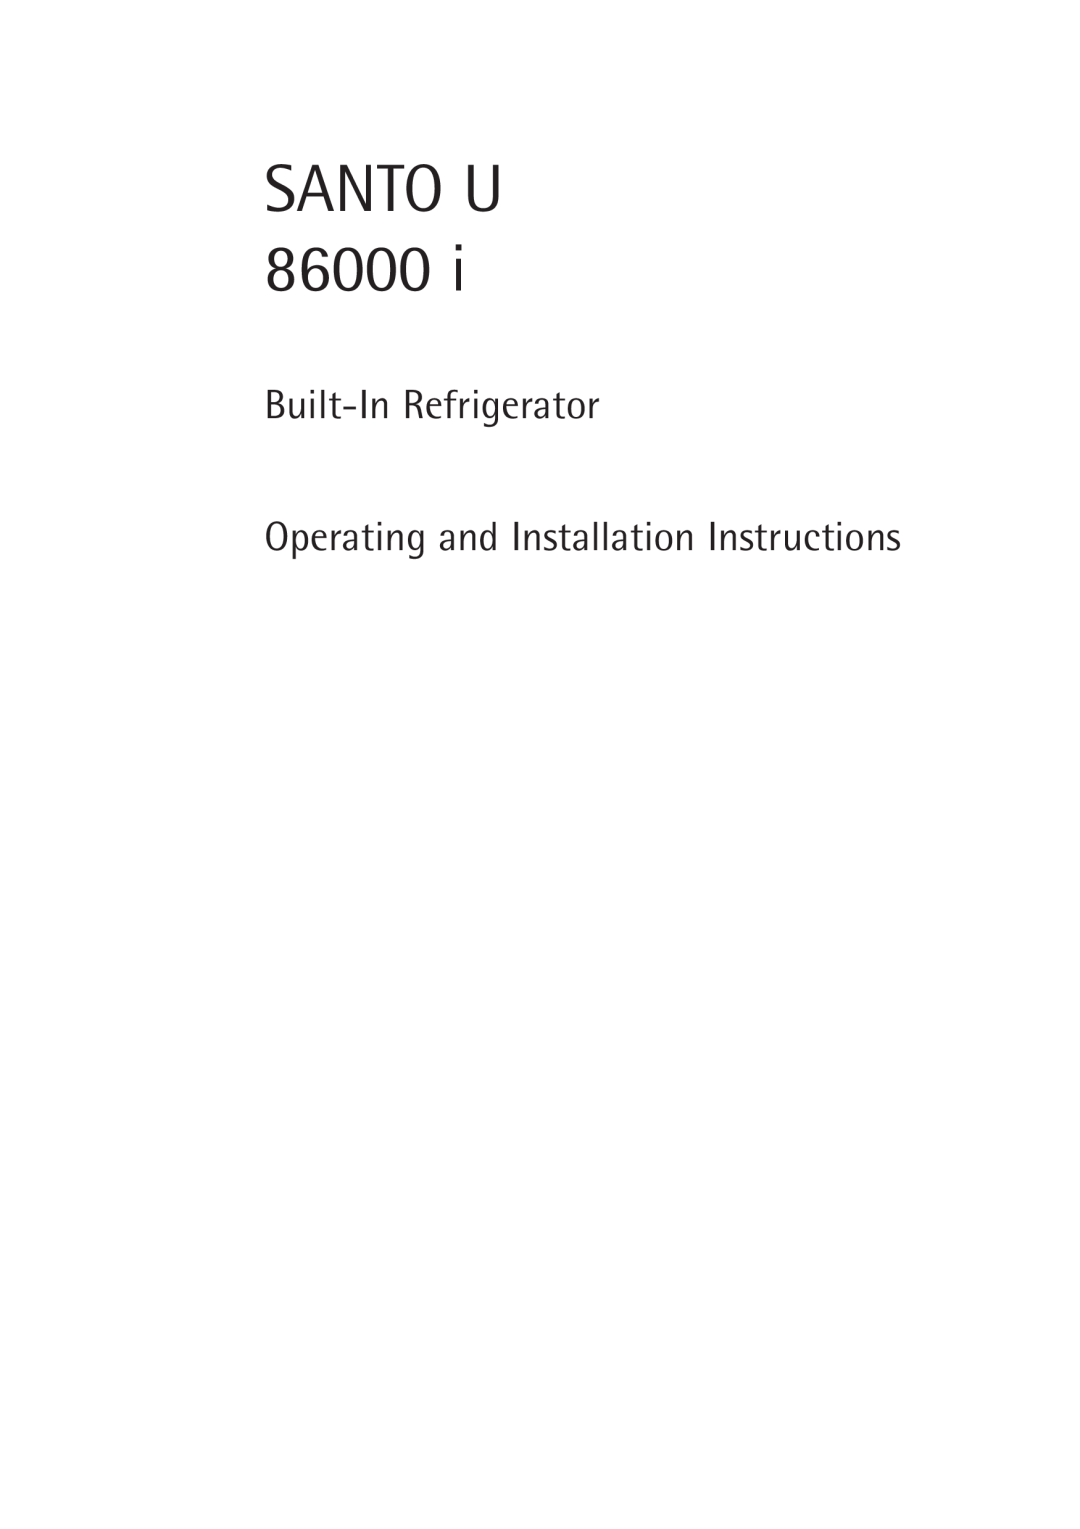 Electrolux 86000 i installation instructions SANTO U 86000, Built-In Refrigerator Operating and Installation Instructions 